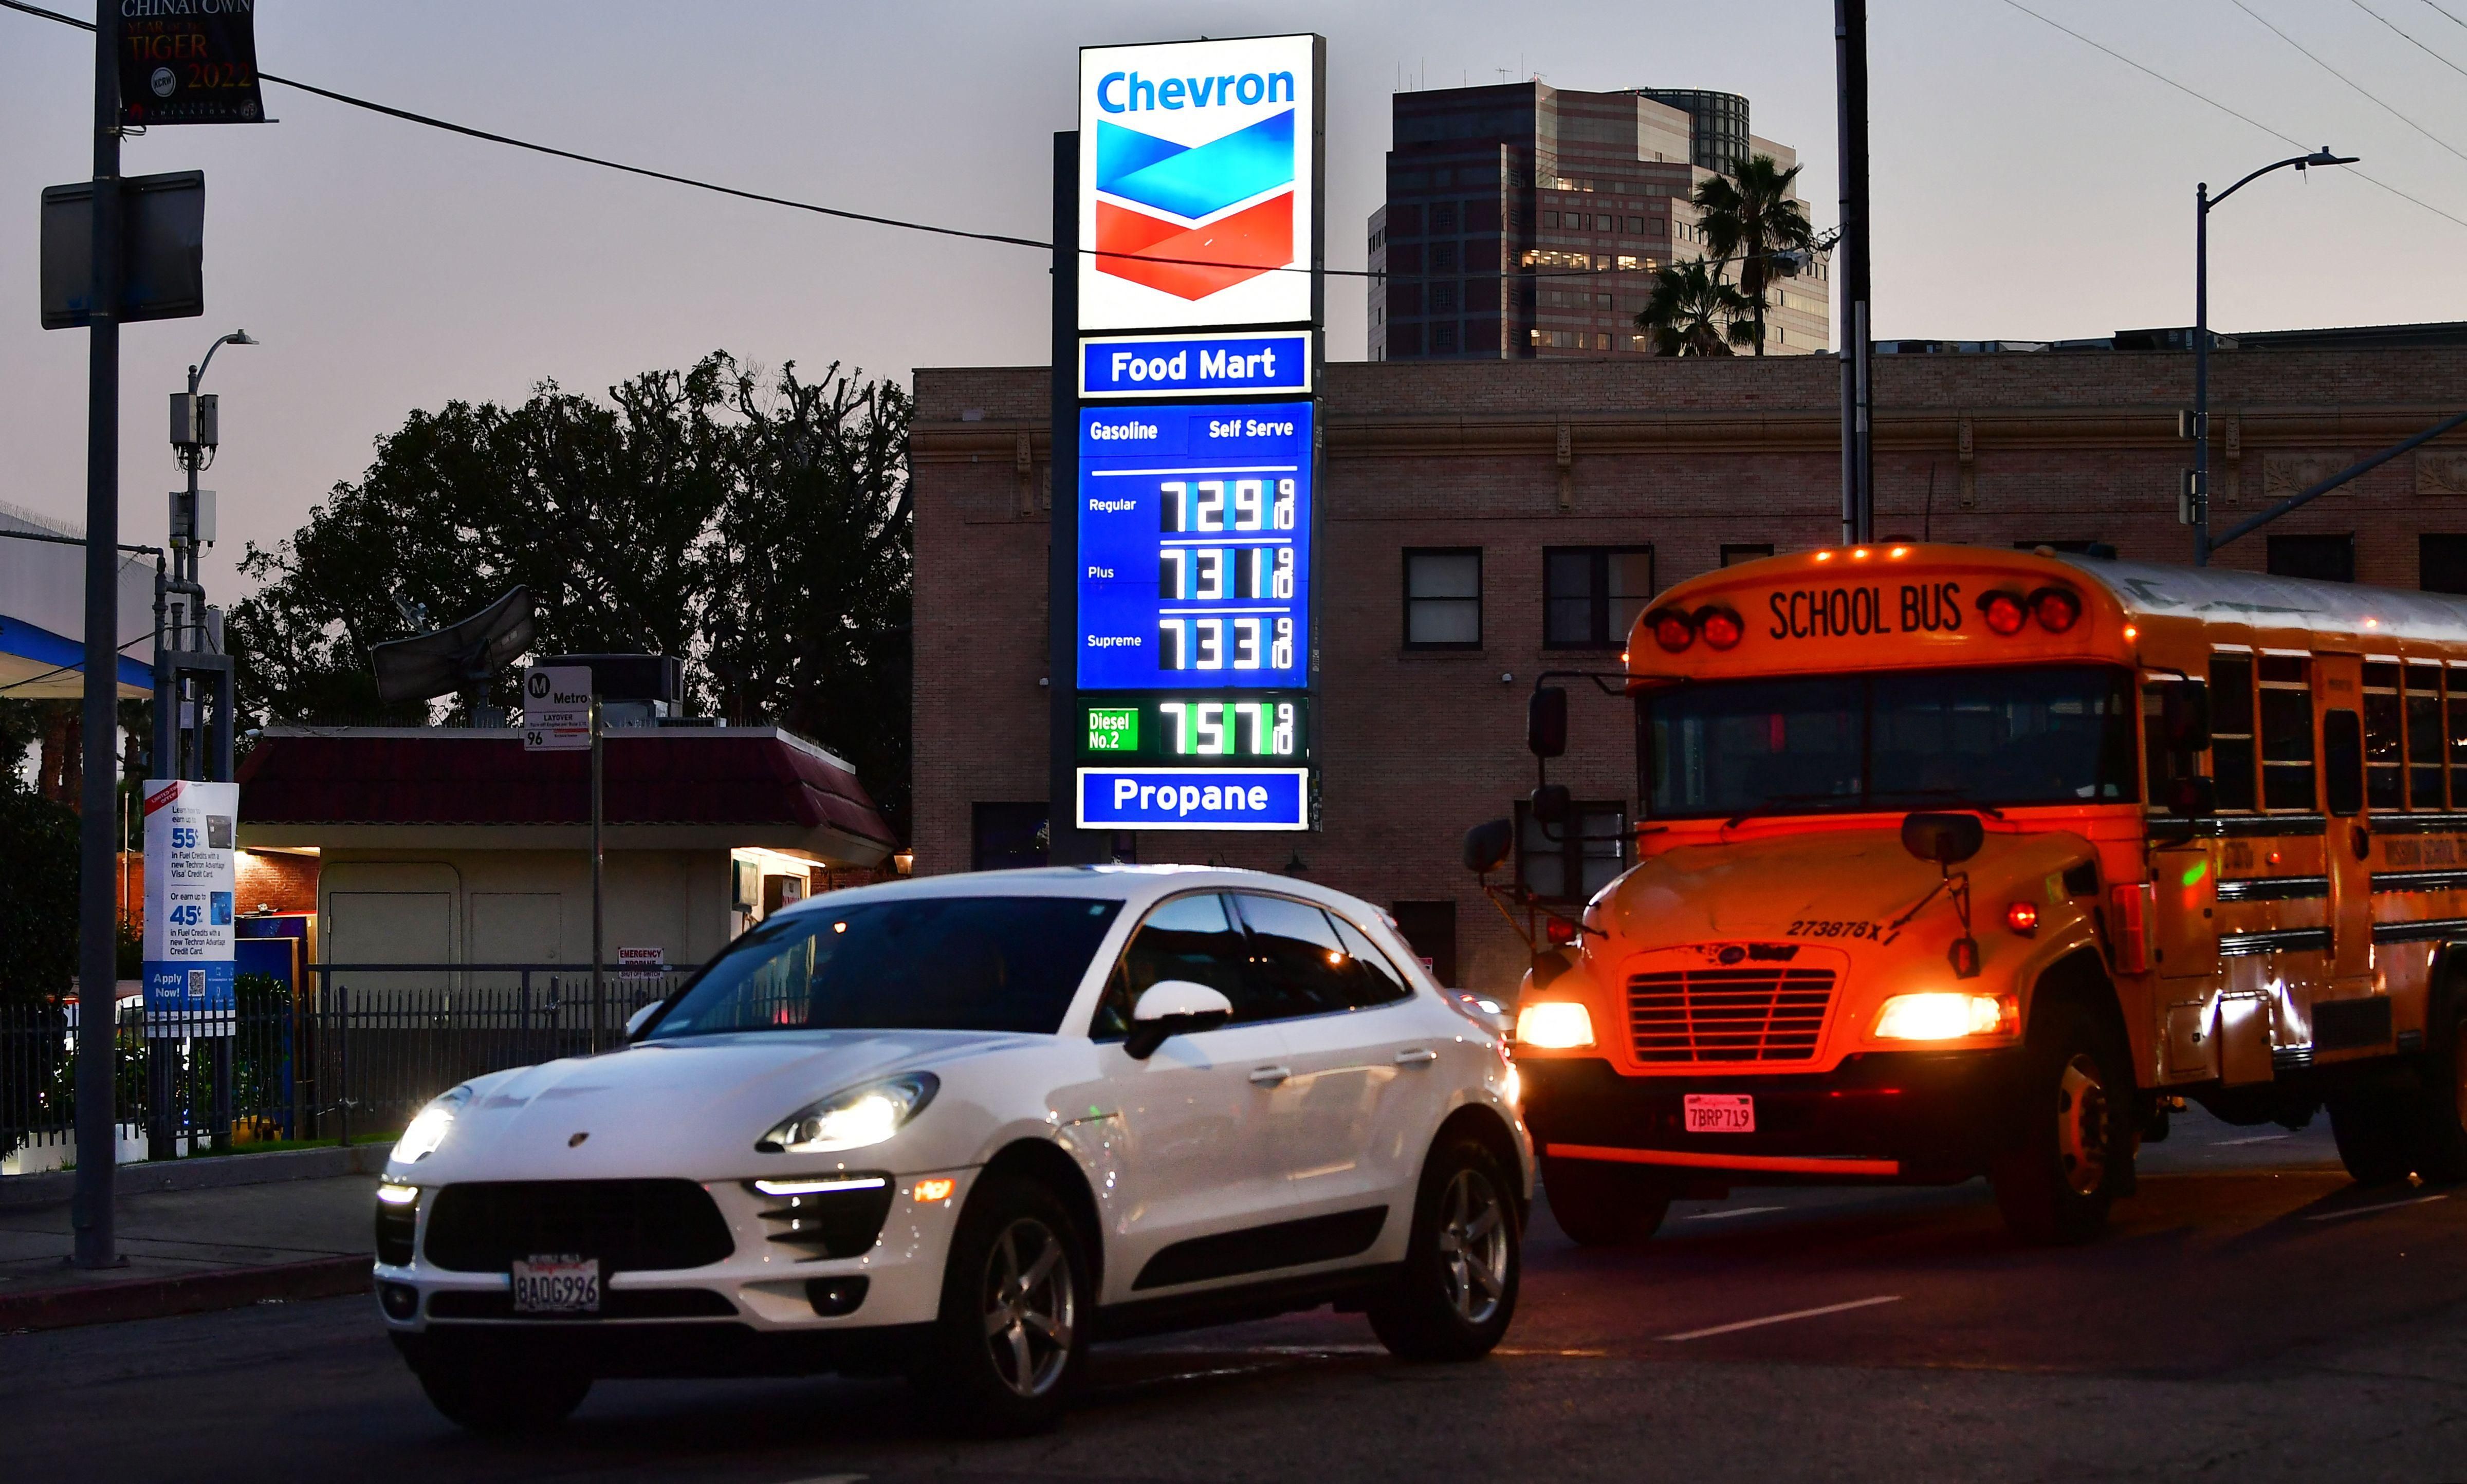 Gas prices of more than $7.00 per gallon are posted at a downtown Los Angeles gas station on March 9, 2022.